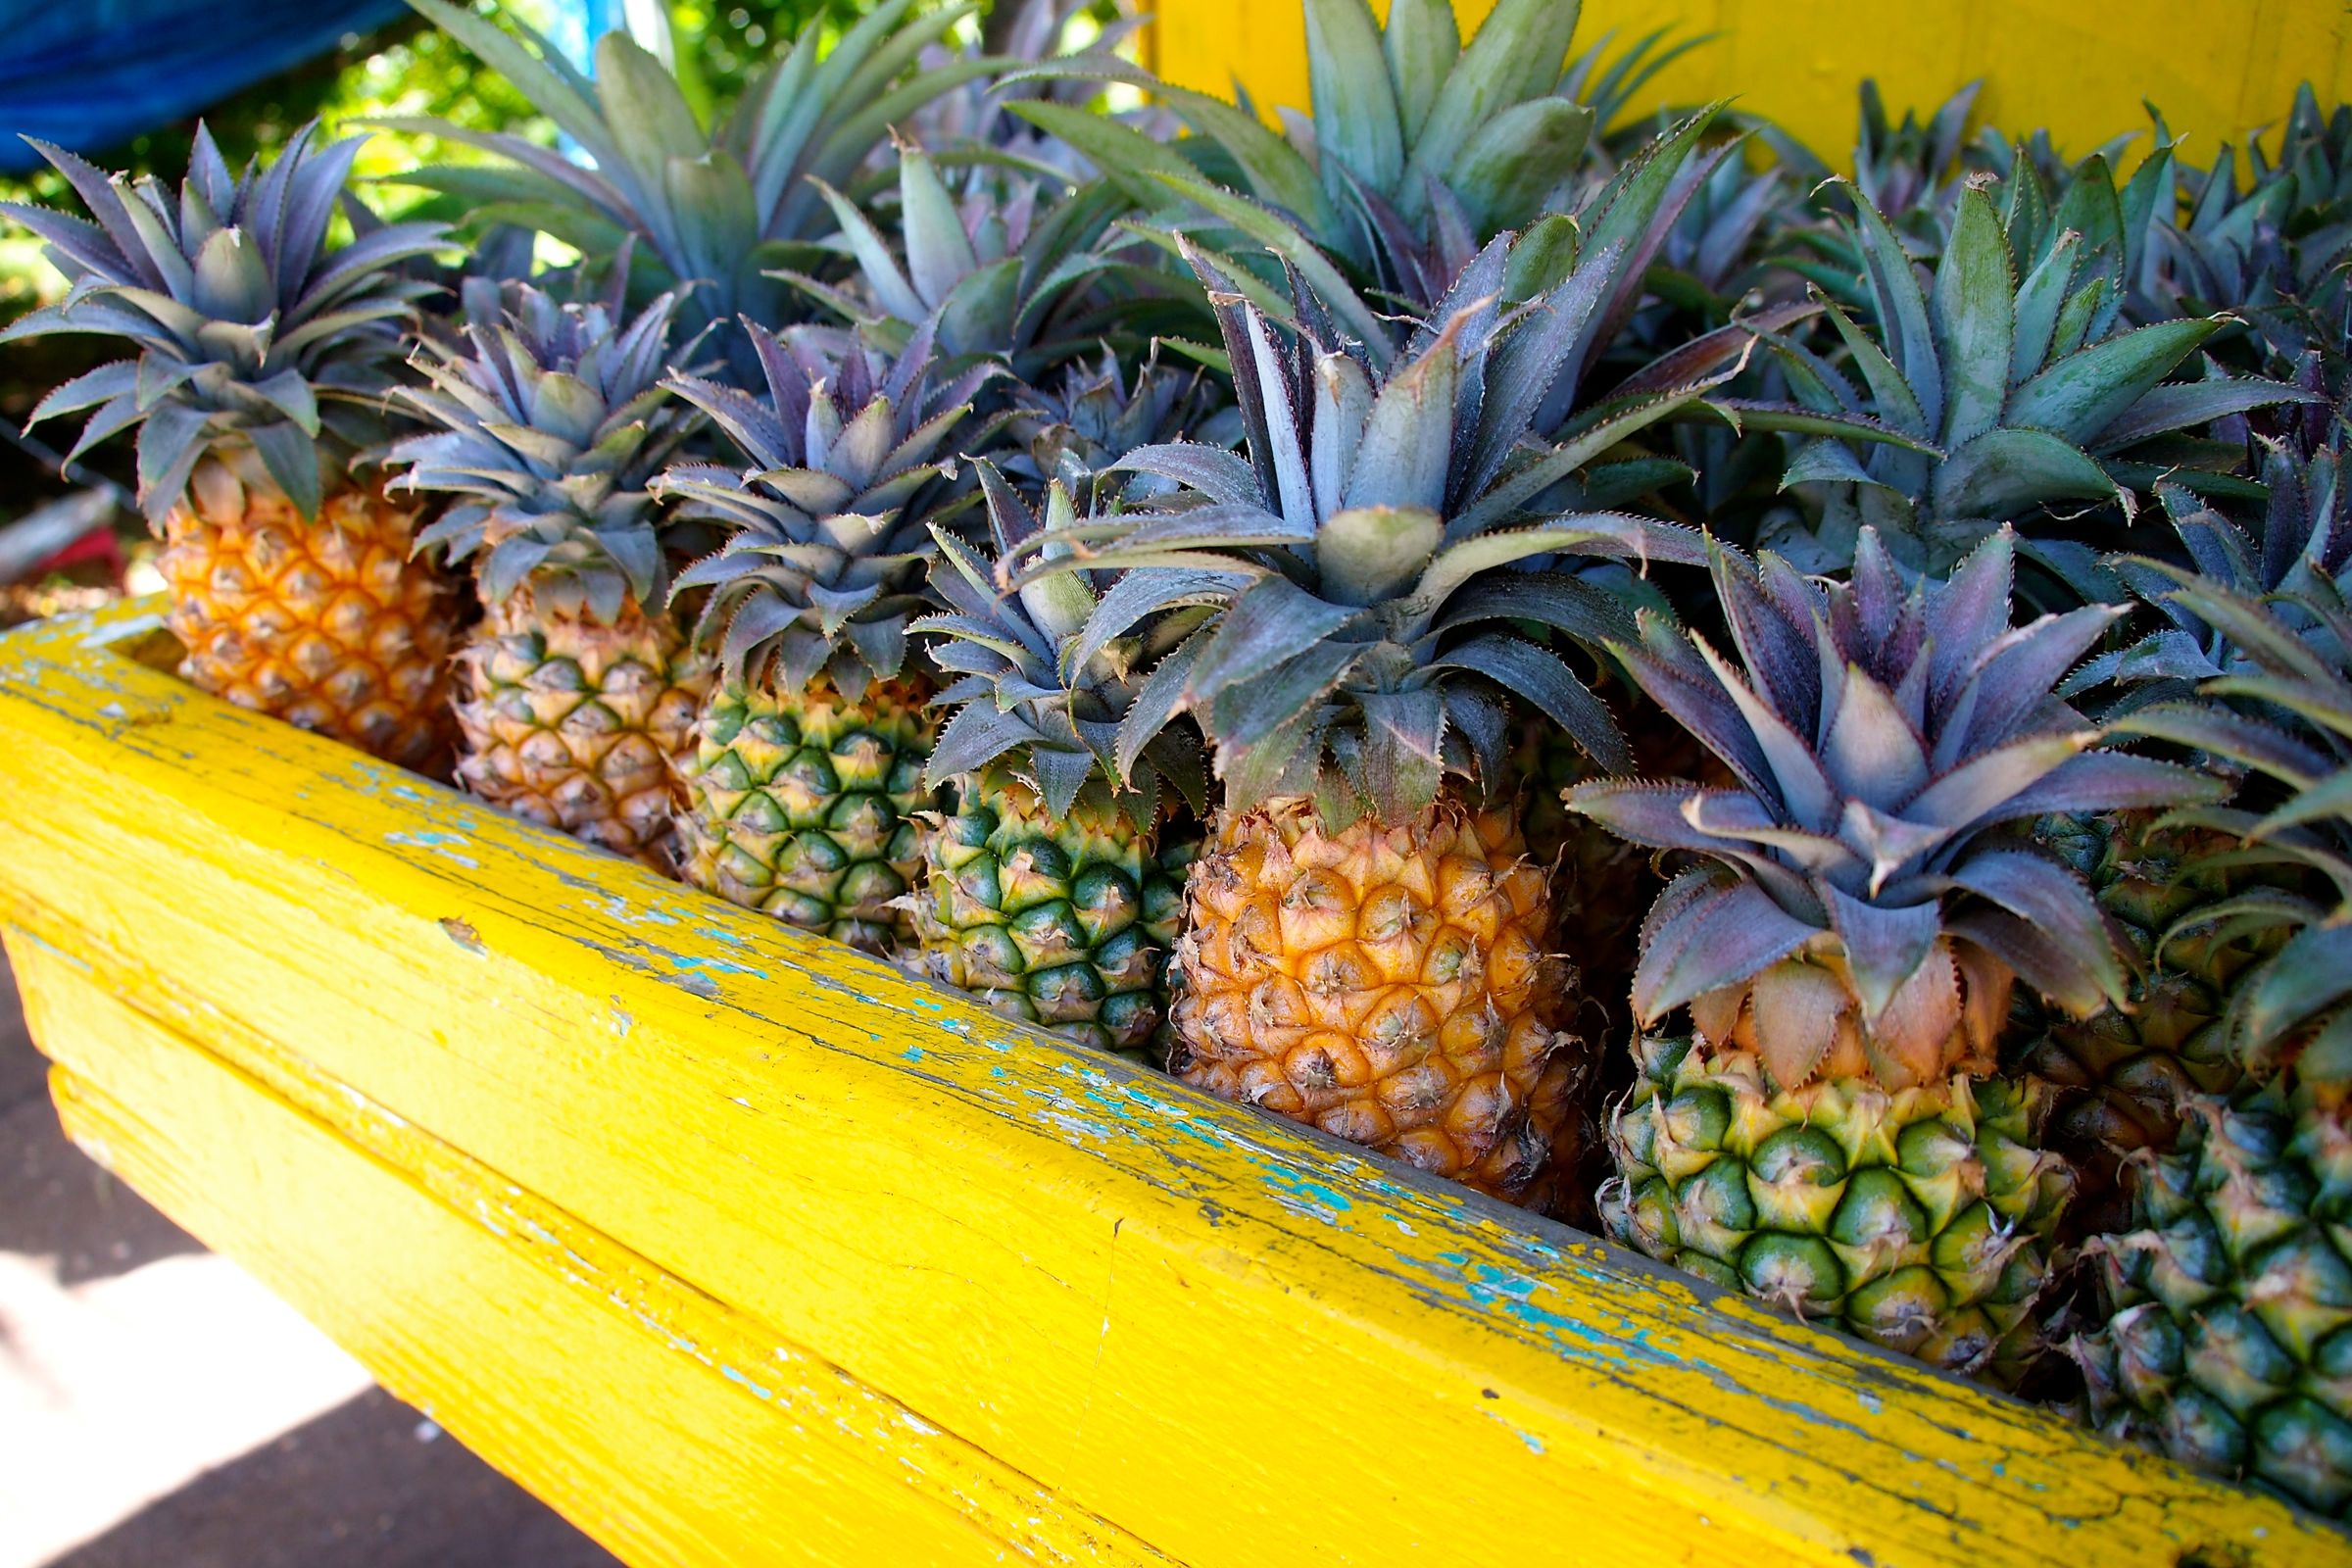 Meet California's $395 Pineapple: Why This Luxury Fruit is Turning Heads